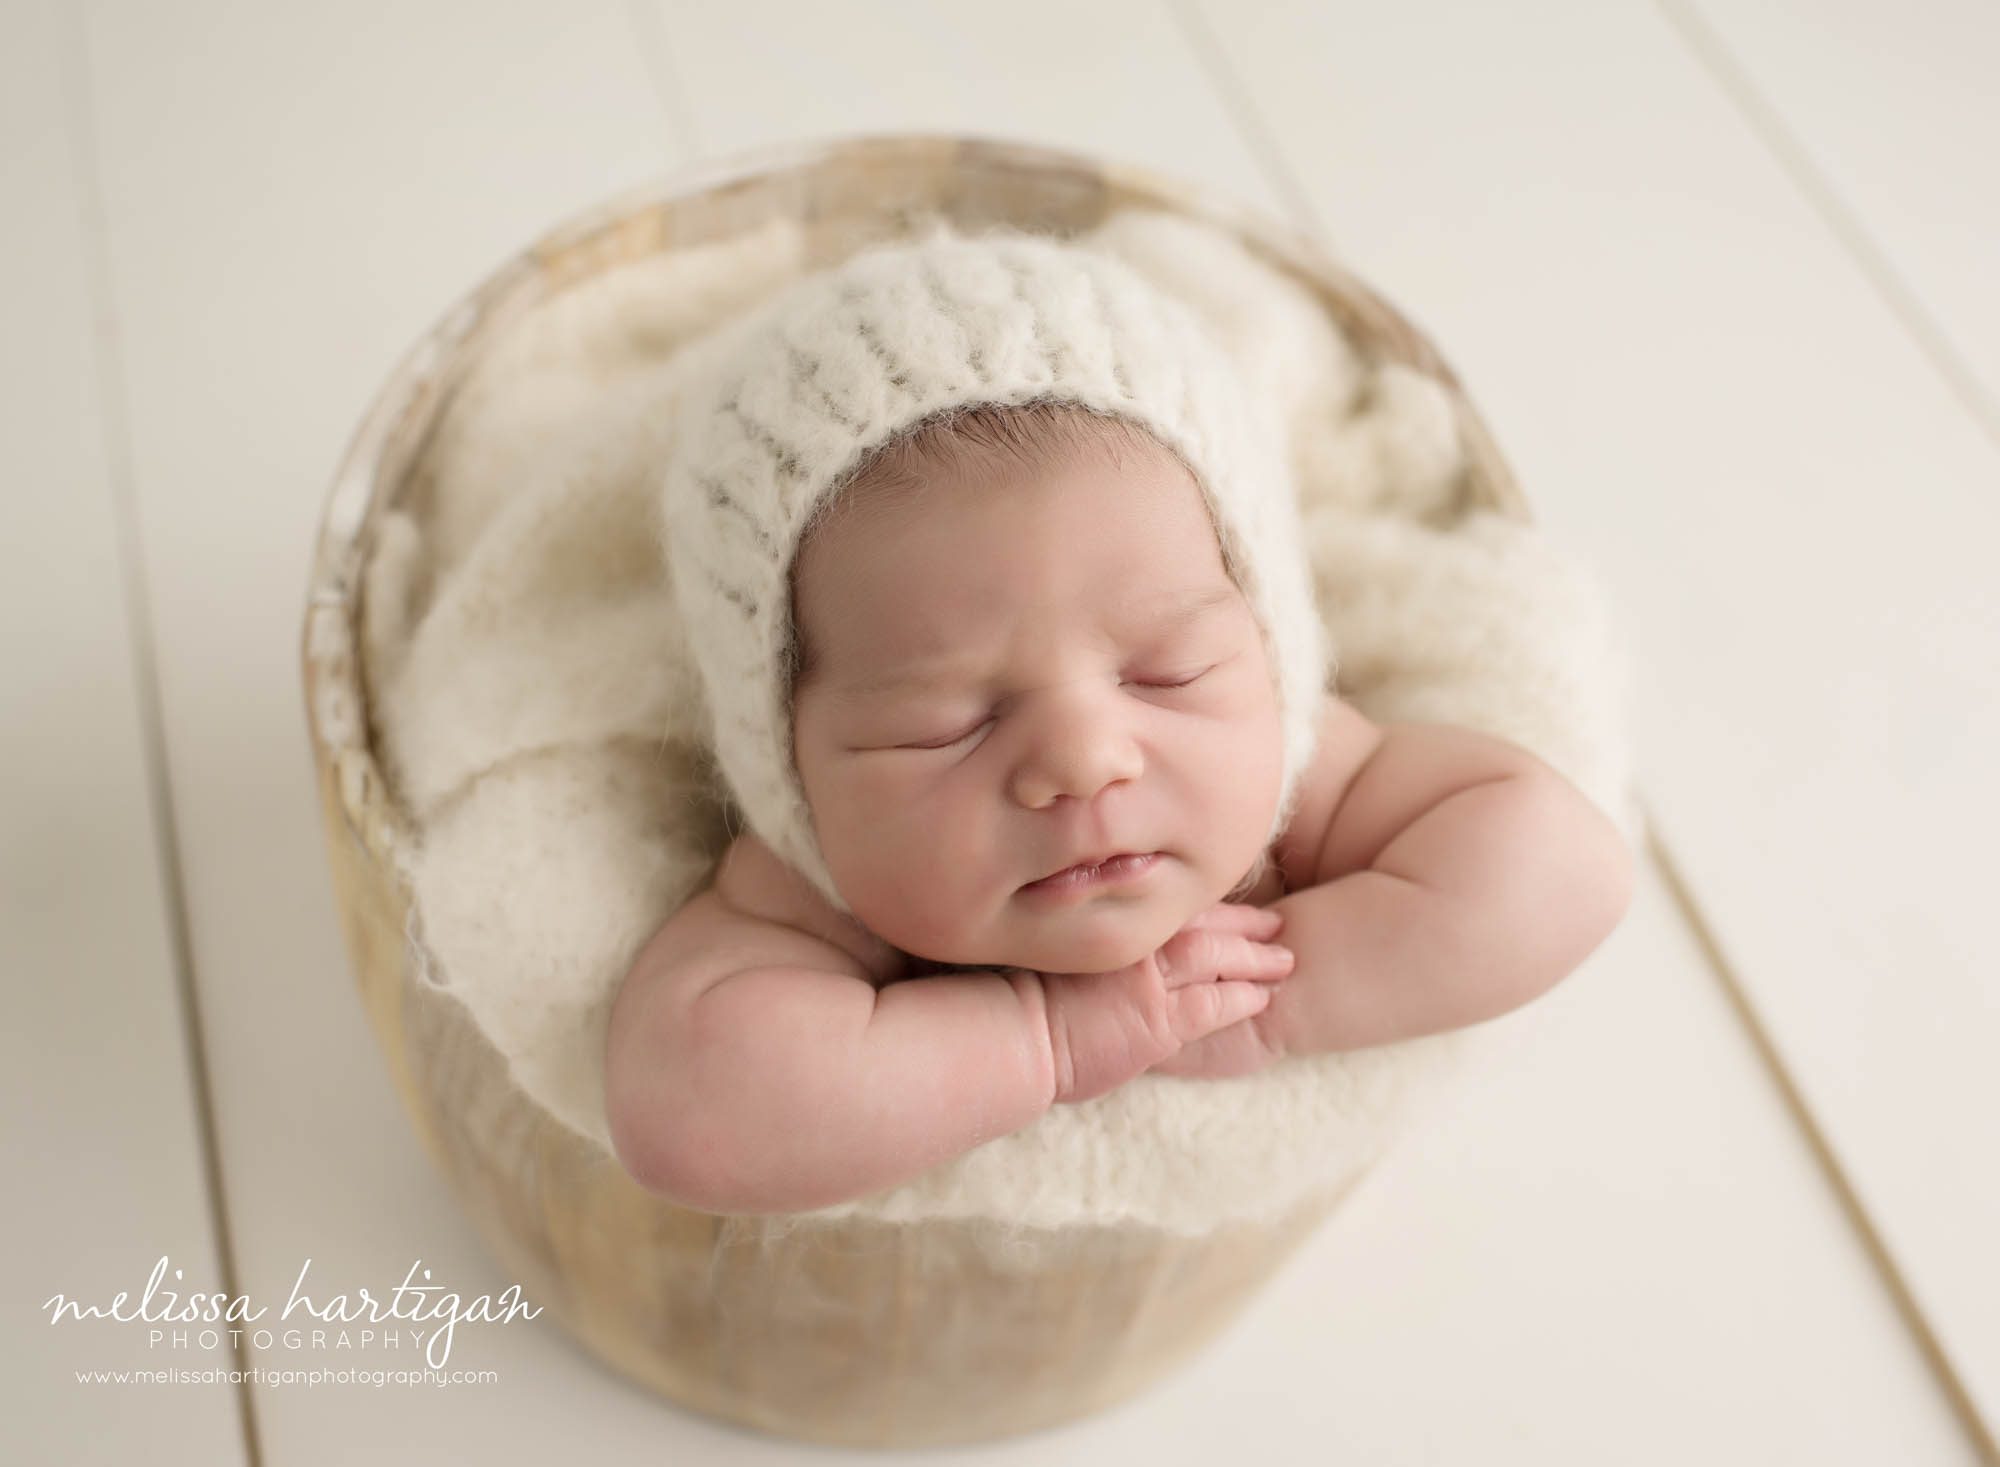 Melissa Hartigan Photography CT Newborn Photographer Emerson CT Newborn Session baby girl sleeping in wooden bucket with cream blanket and knit hat with arms crossed under chin